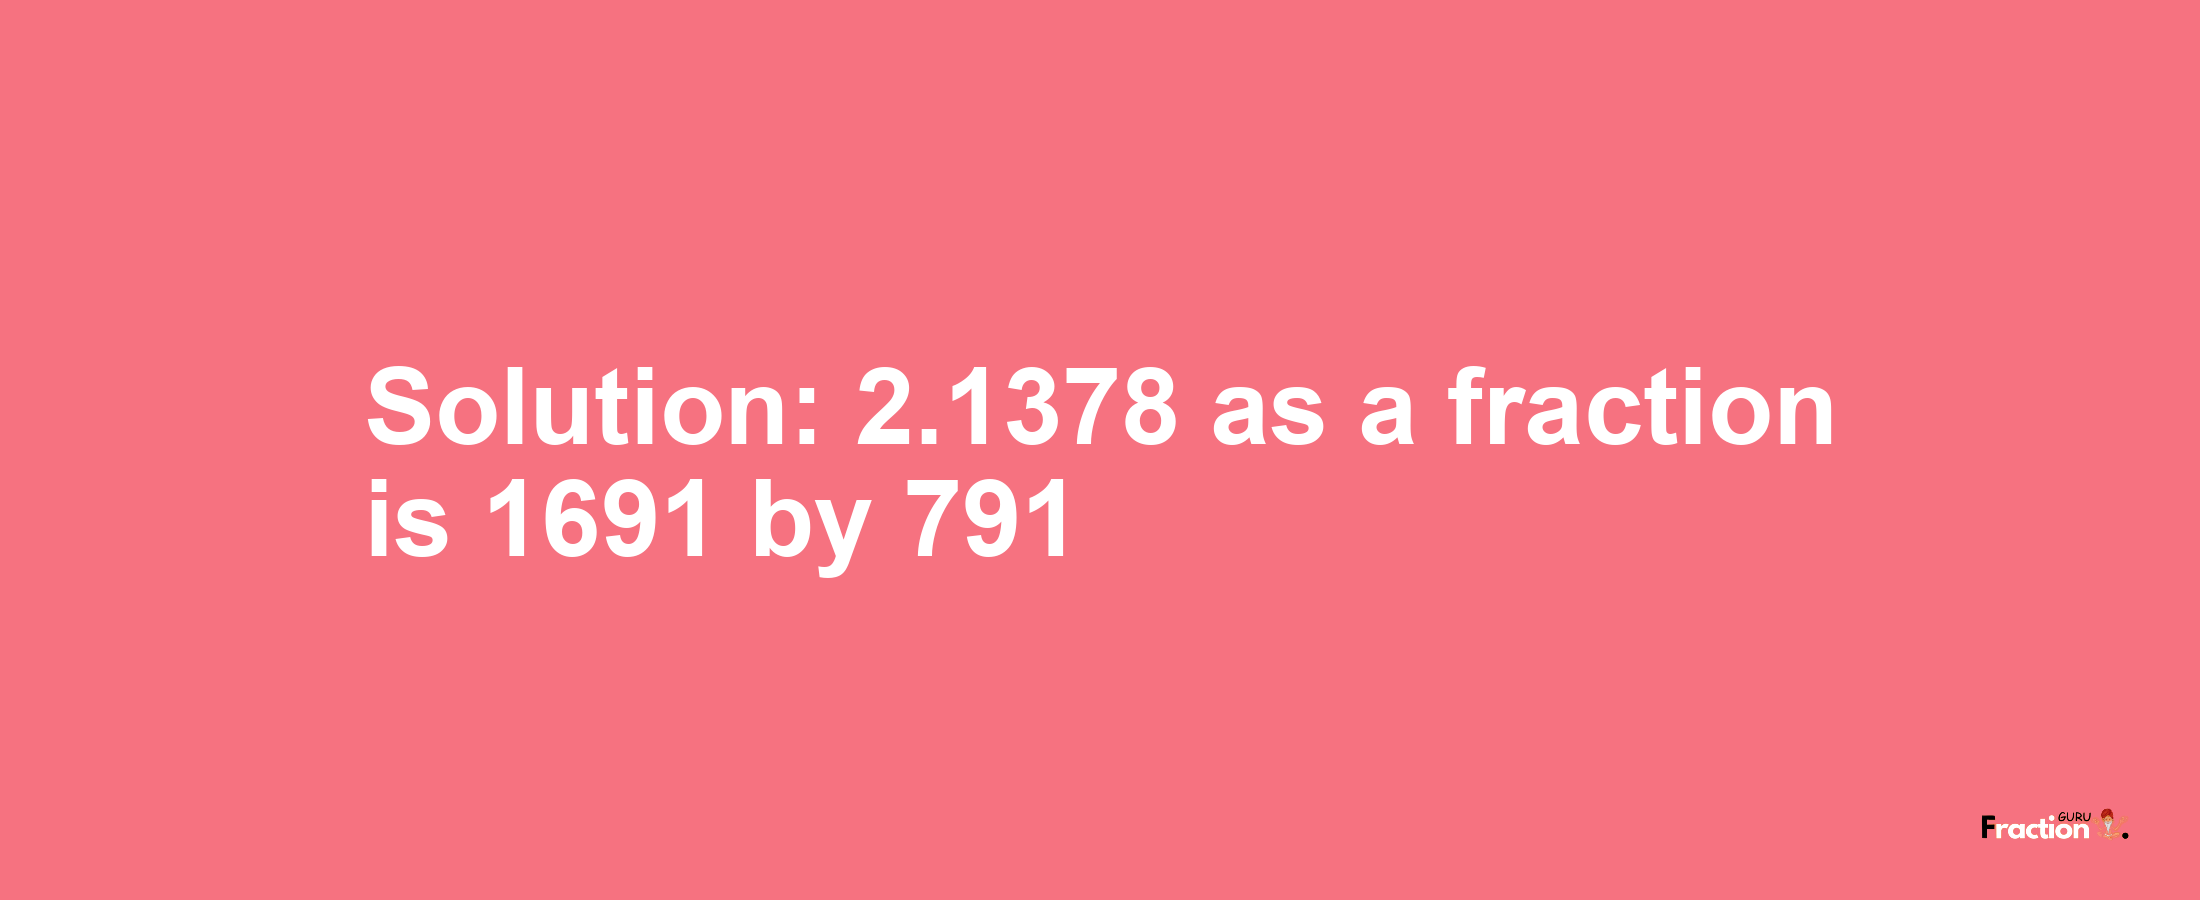 Solution:2.1378 as a fraction is 1691/791